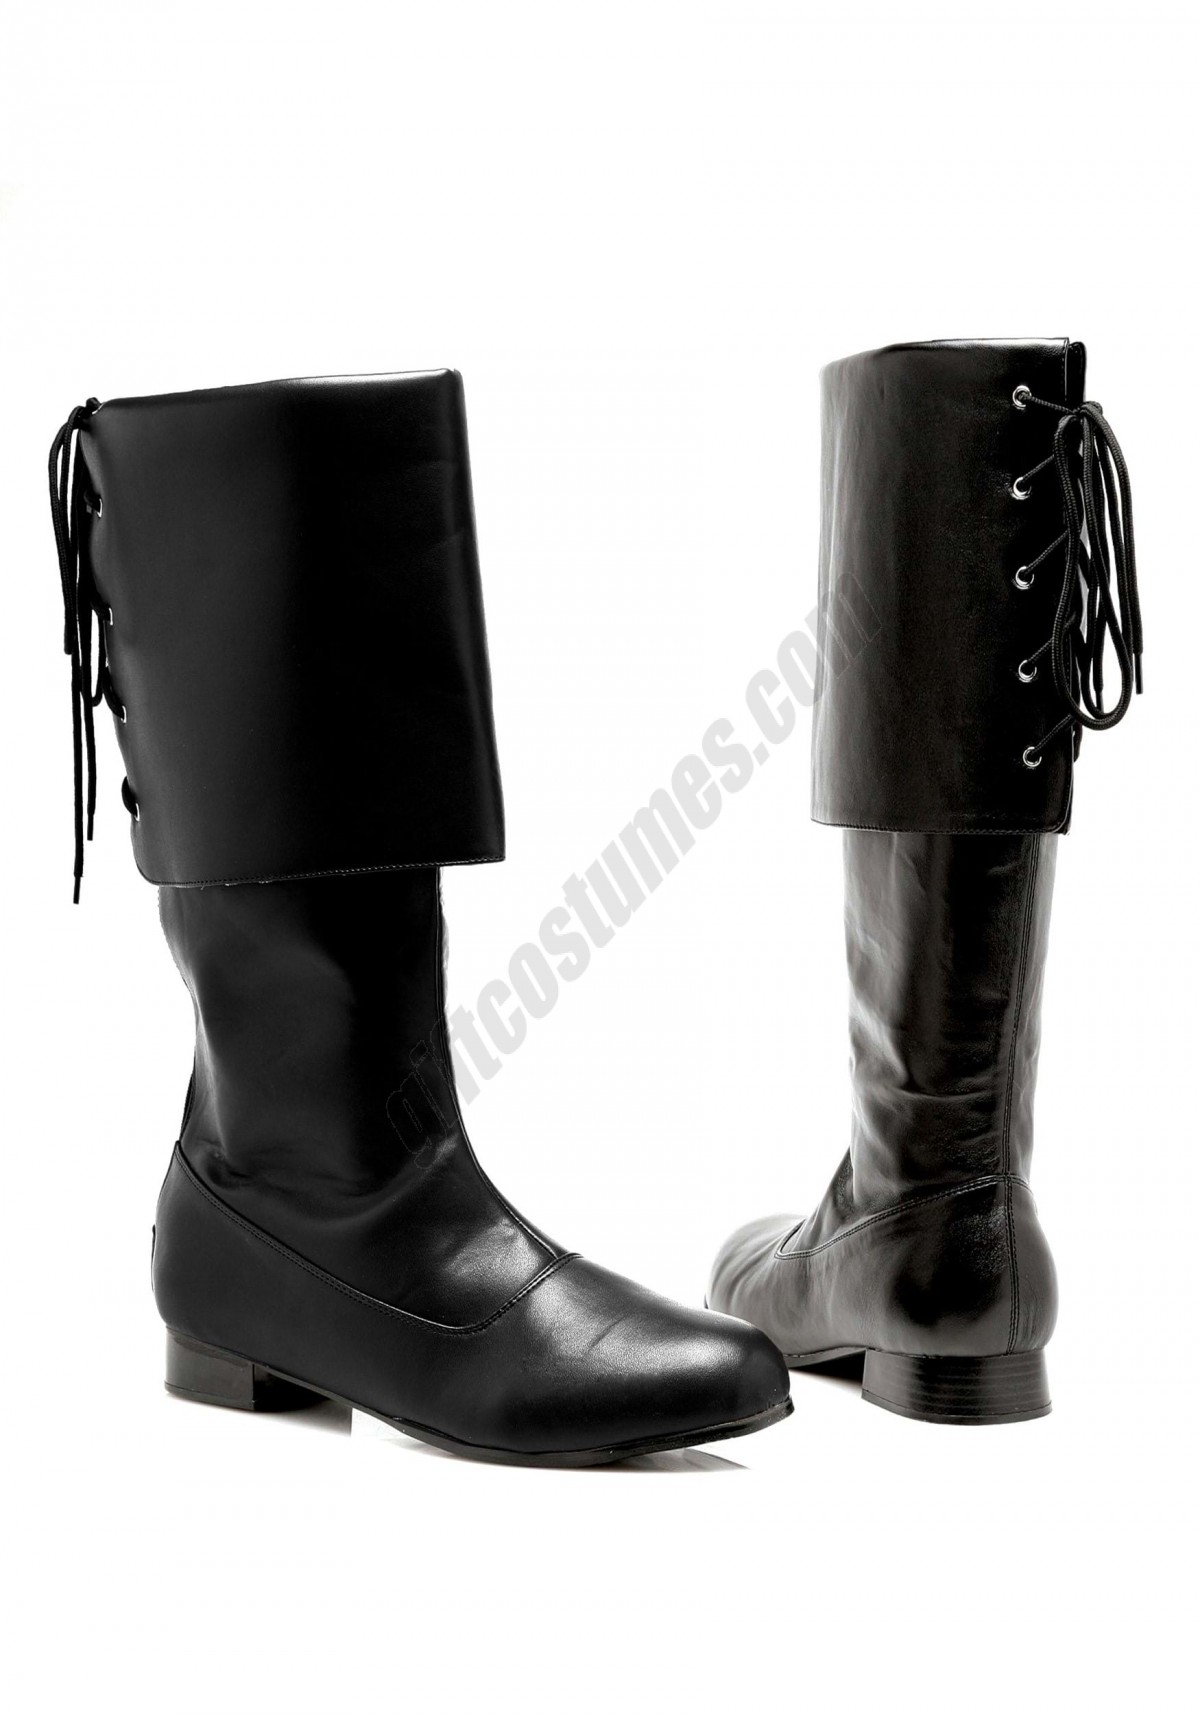 Black Pirate Buckle Boot for Men Promotions - -0